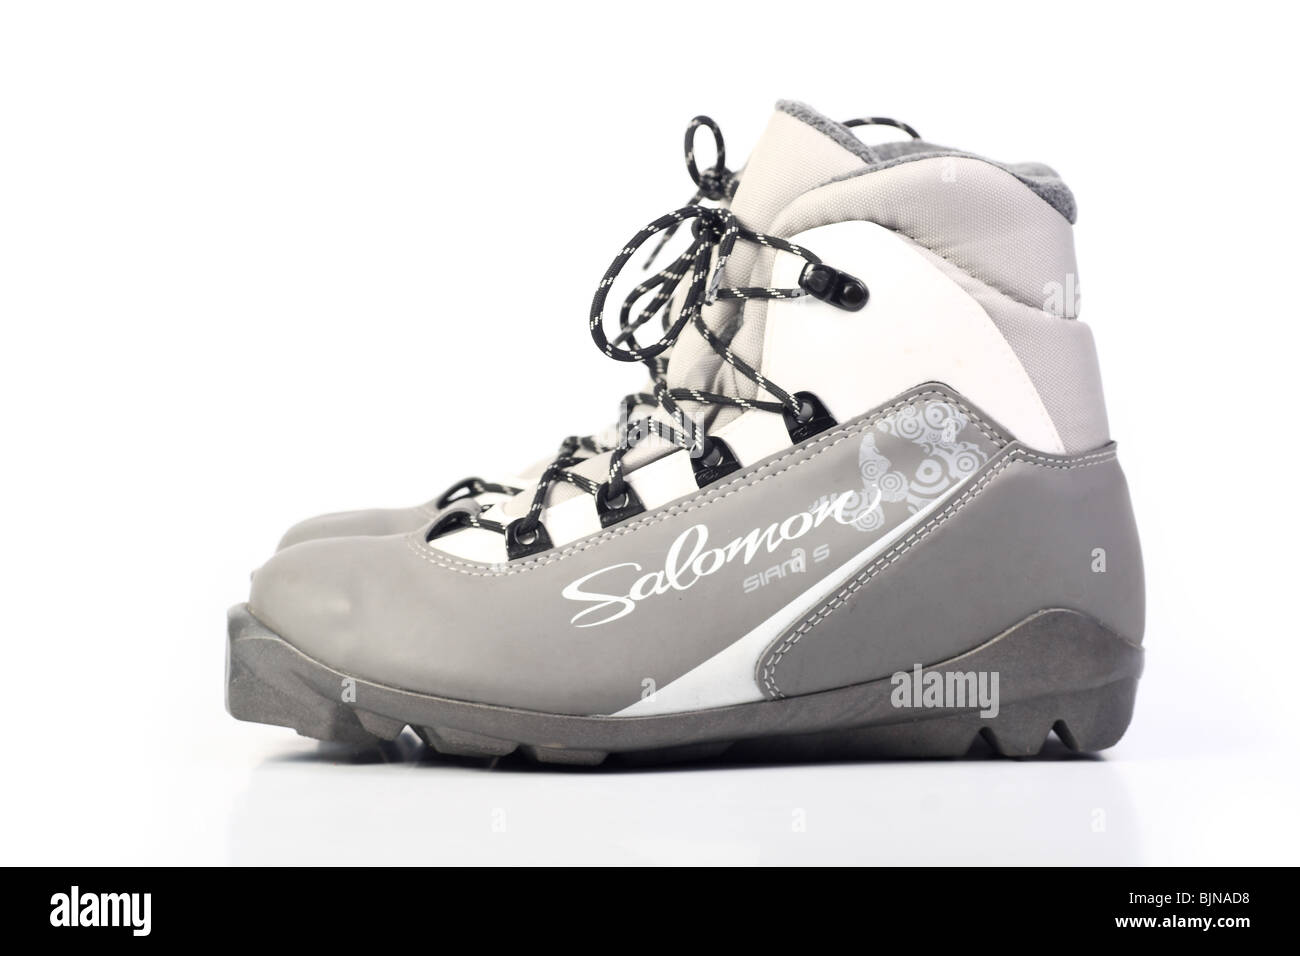 Salomon nordic ski boots hi-res stock photography and images - Alamy